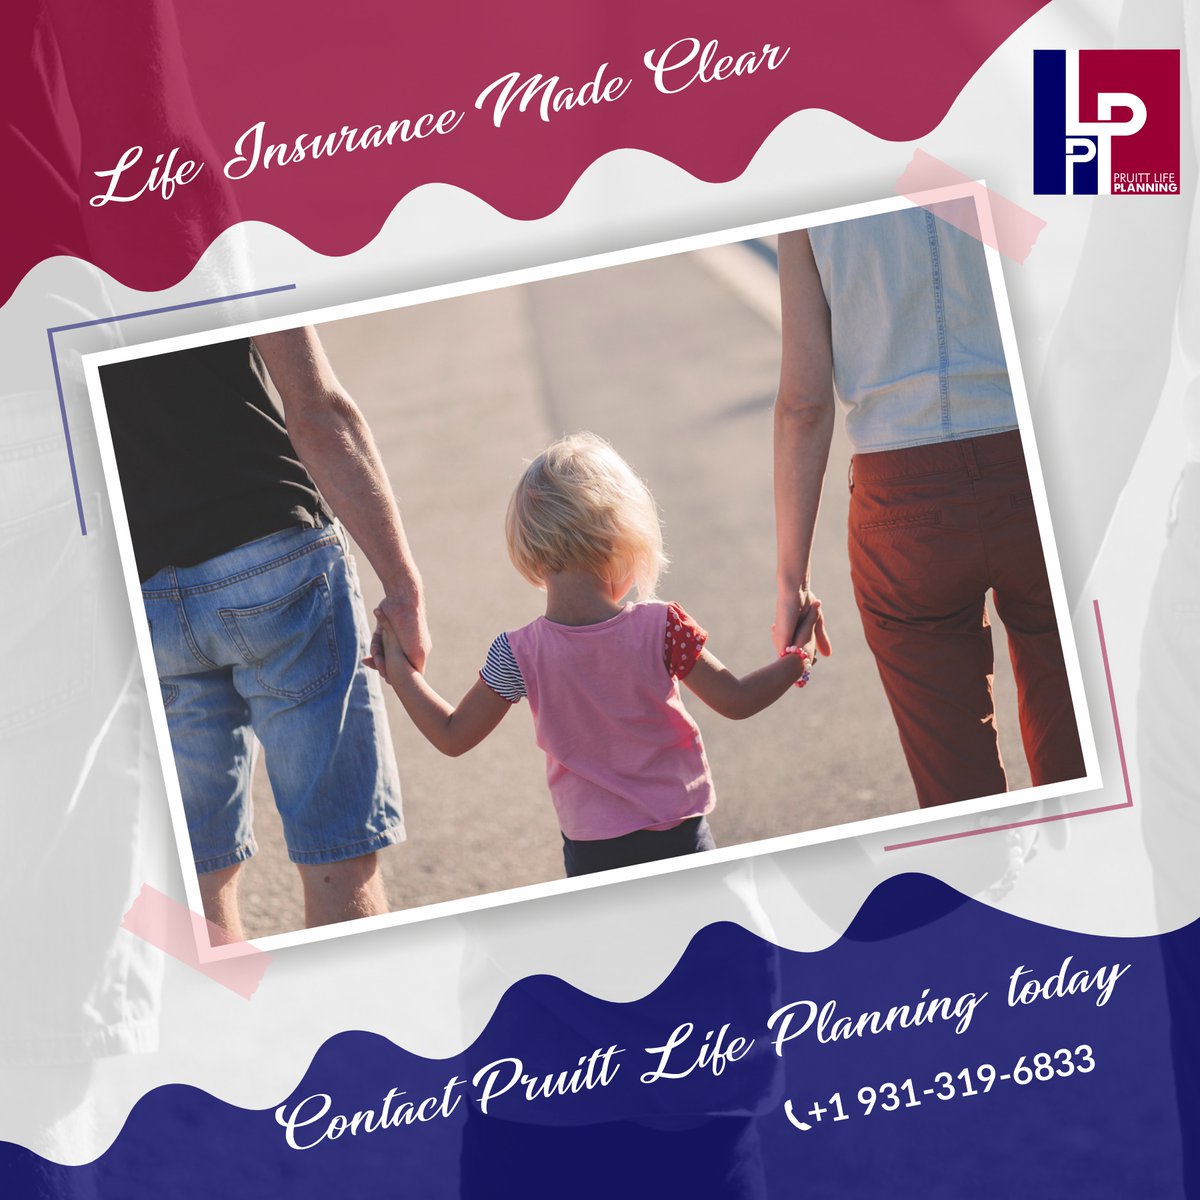 At Pruitt Life Planning, we're here to make life insurance clear and simple. Let's protect what matters most, together.

Call Us On +1 931-319-6833

#PlanForTheFuture #ProtectYourFamily #FinancialSecurity #PruittLifePlanning #PeaceOfMind #LifeInsurance